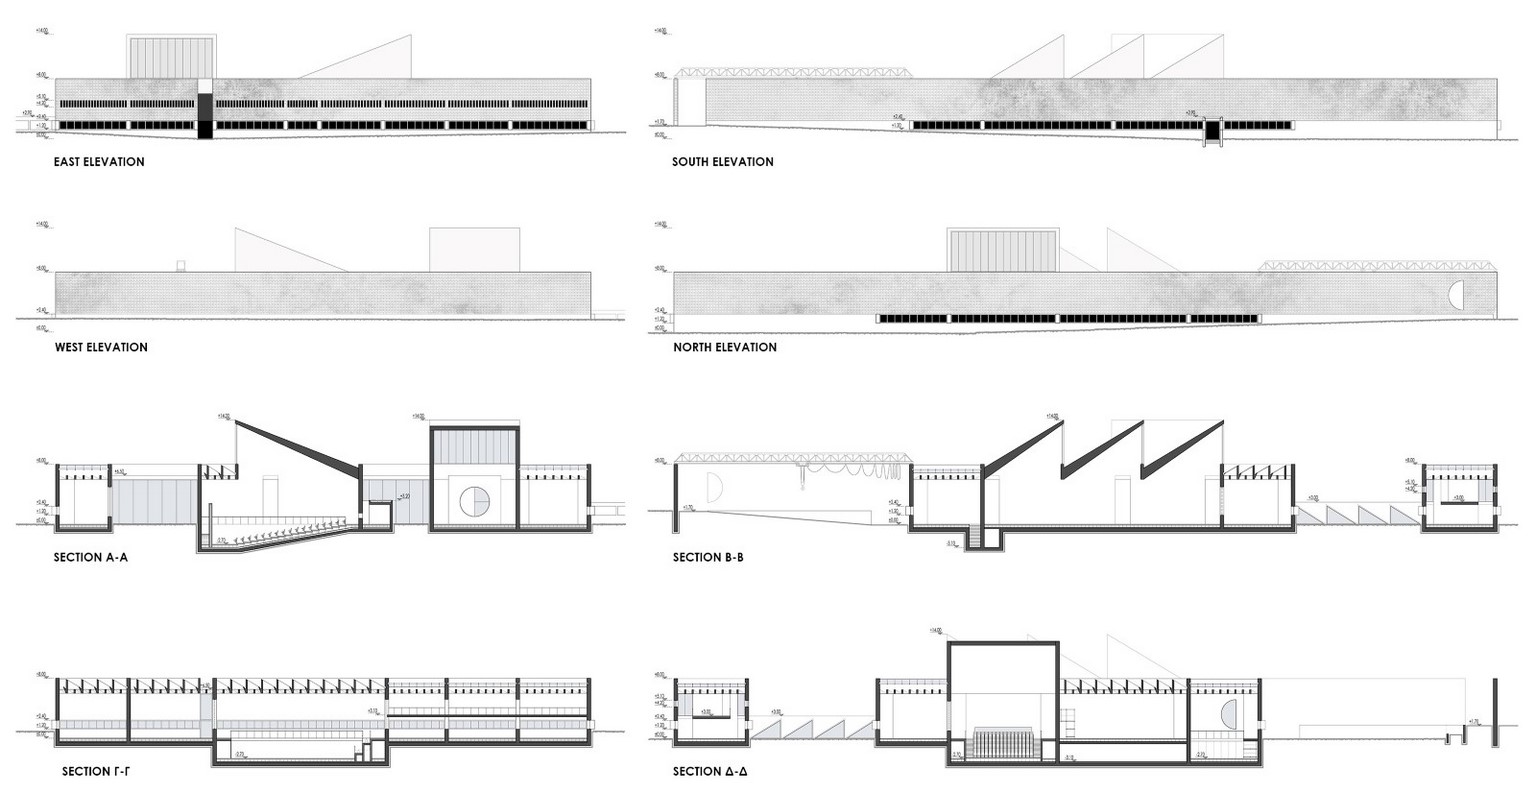 Archisearch Papalampropoulos Syriopoulou Architecture Bureau wins 2nd Prize in the competition for the New Complex for the School of Fine Arts in Florina